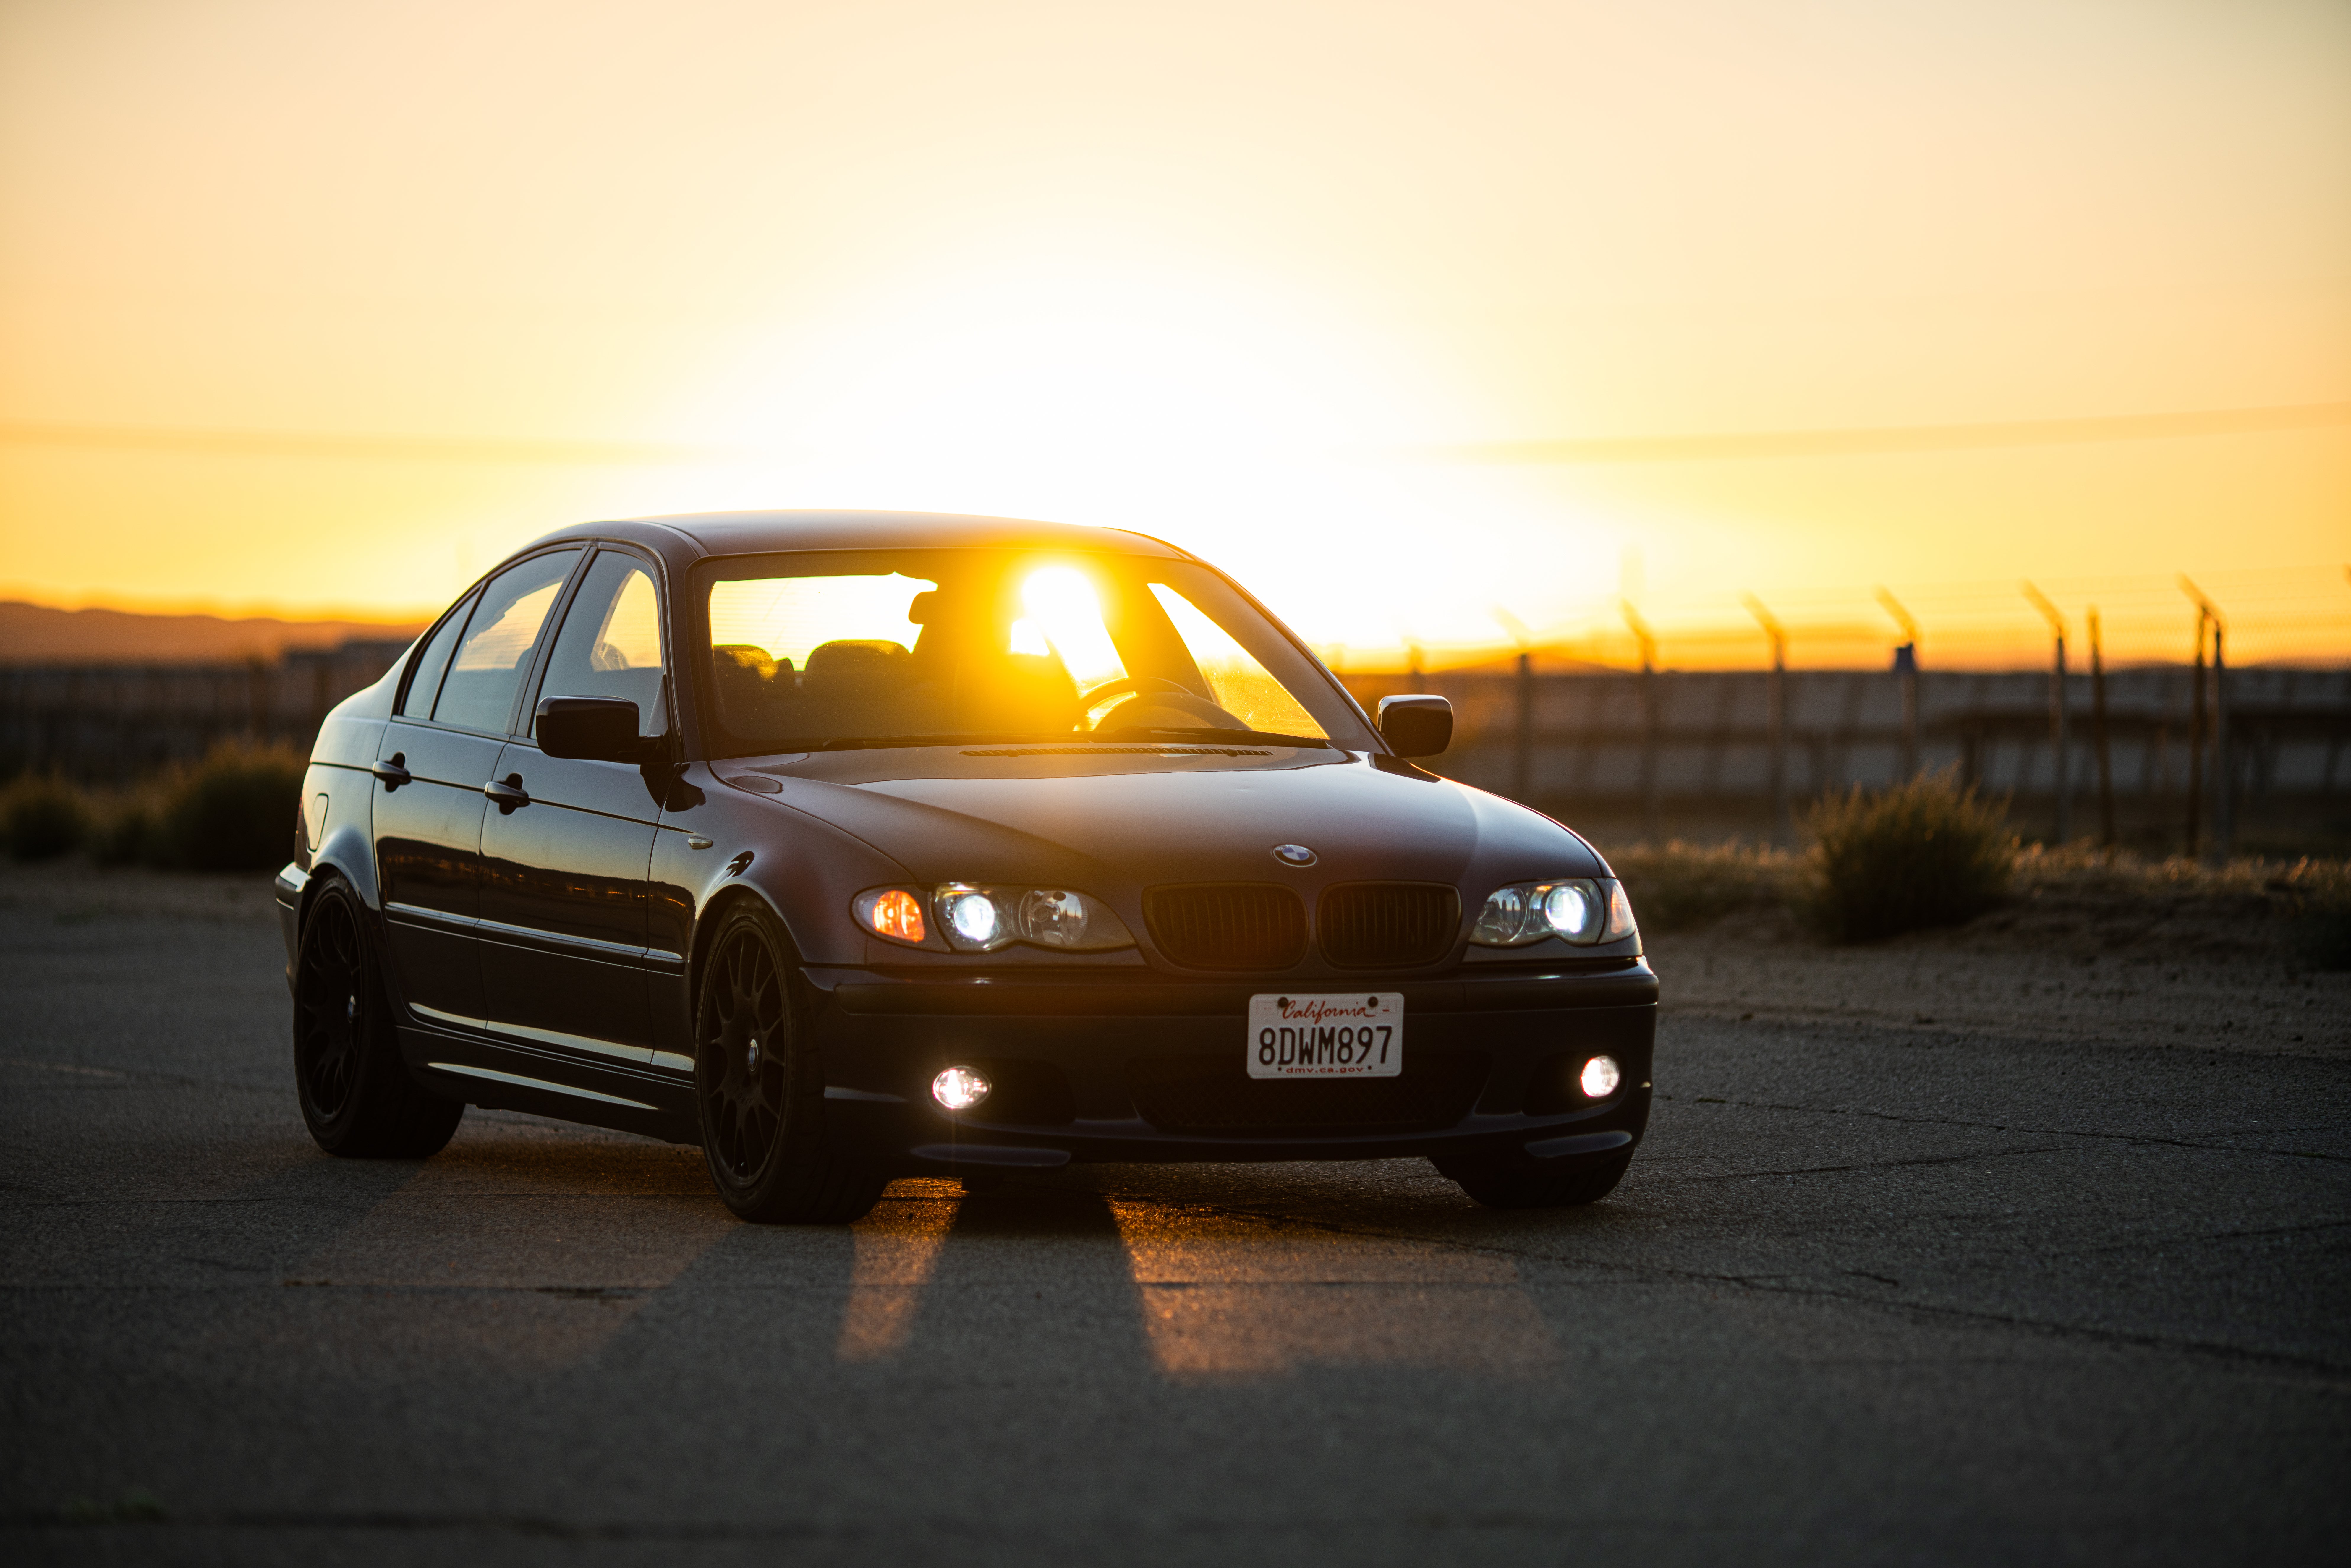 Want to Upgrade Your BMW E46 Without the Aftermarket? Try OEM Plus Mods